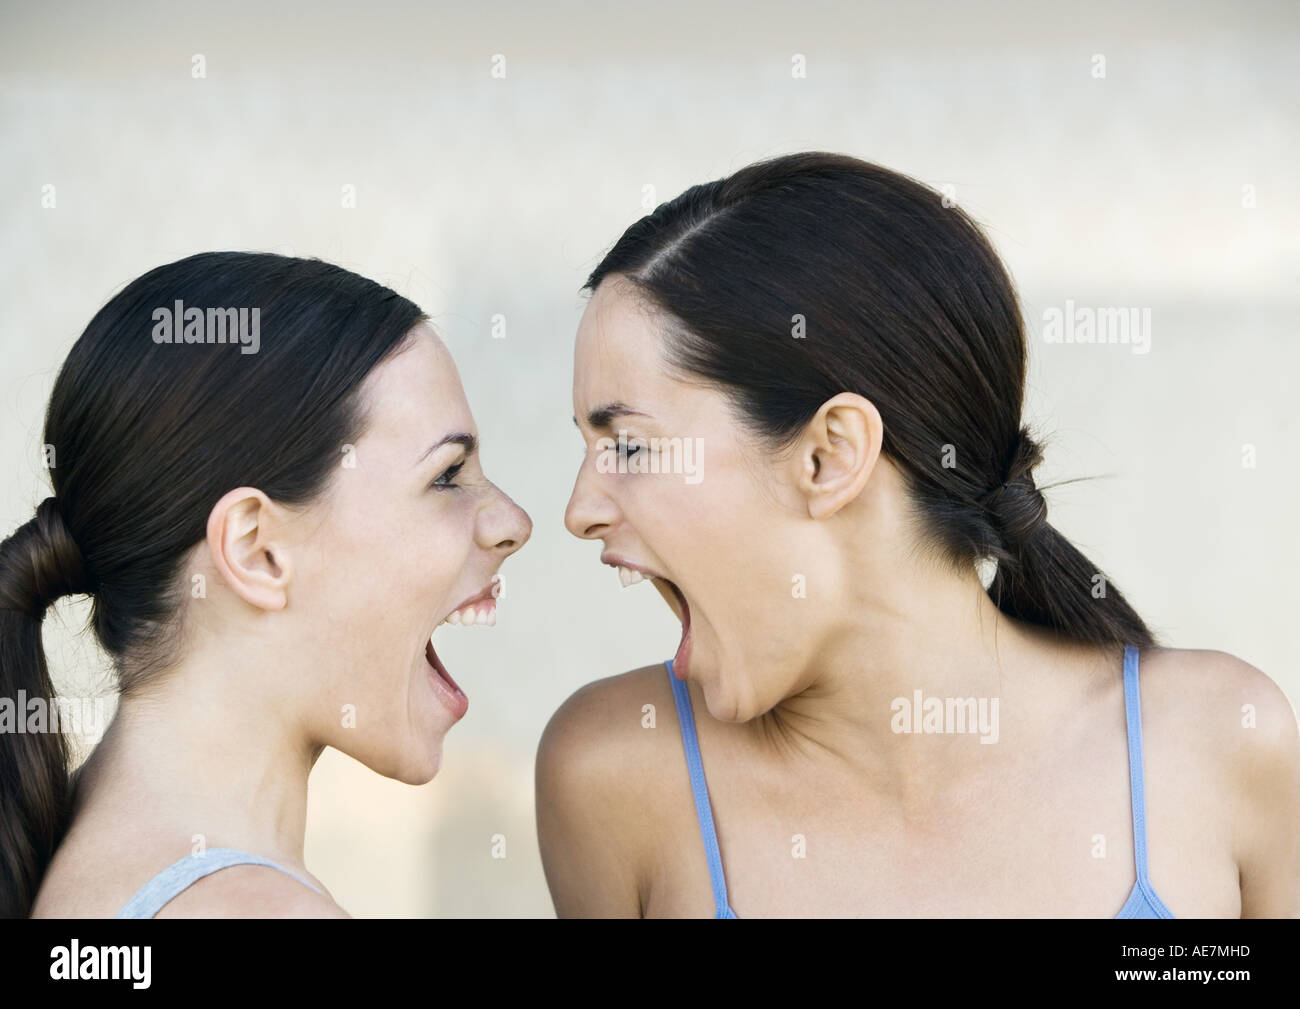 Two young women screaming at each other Stock Photo